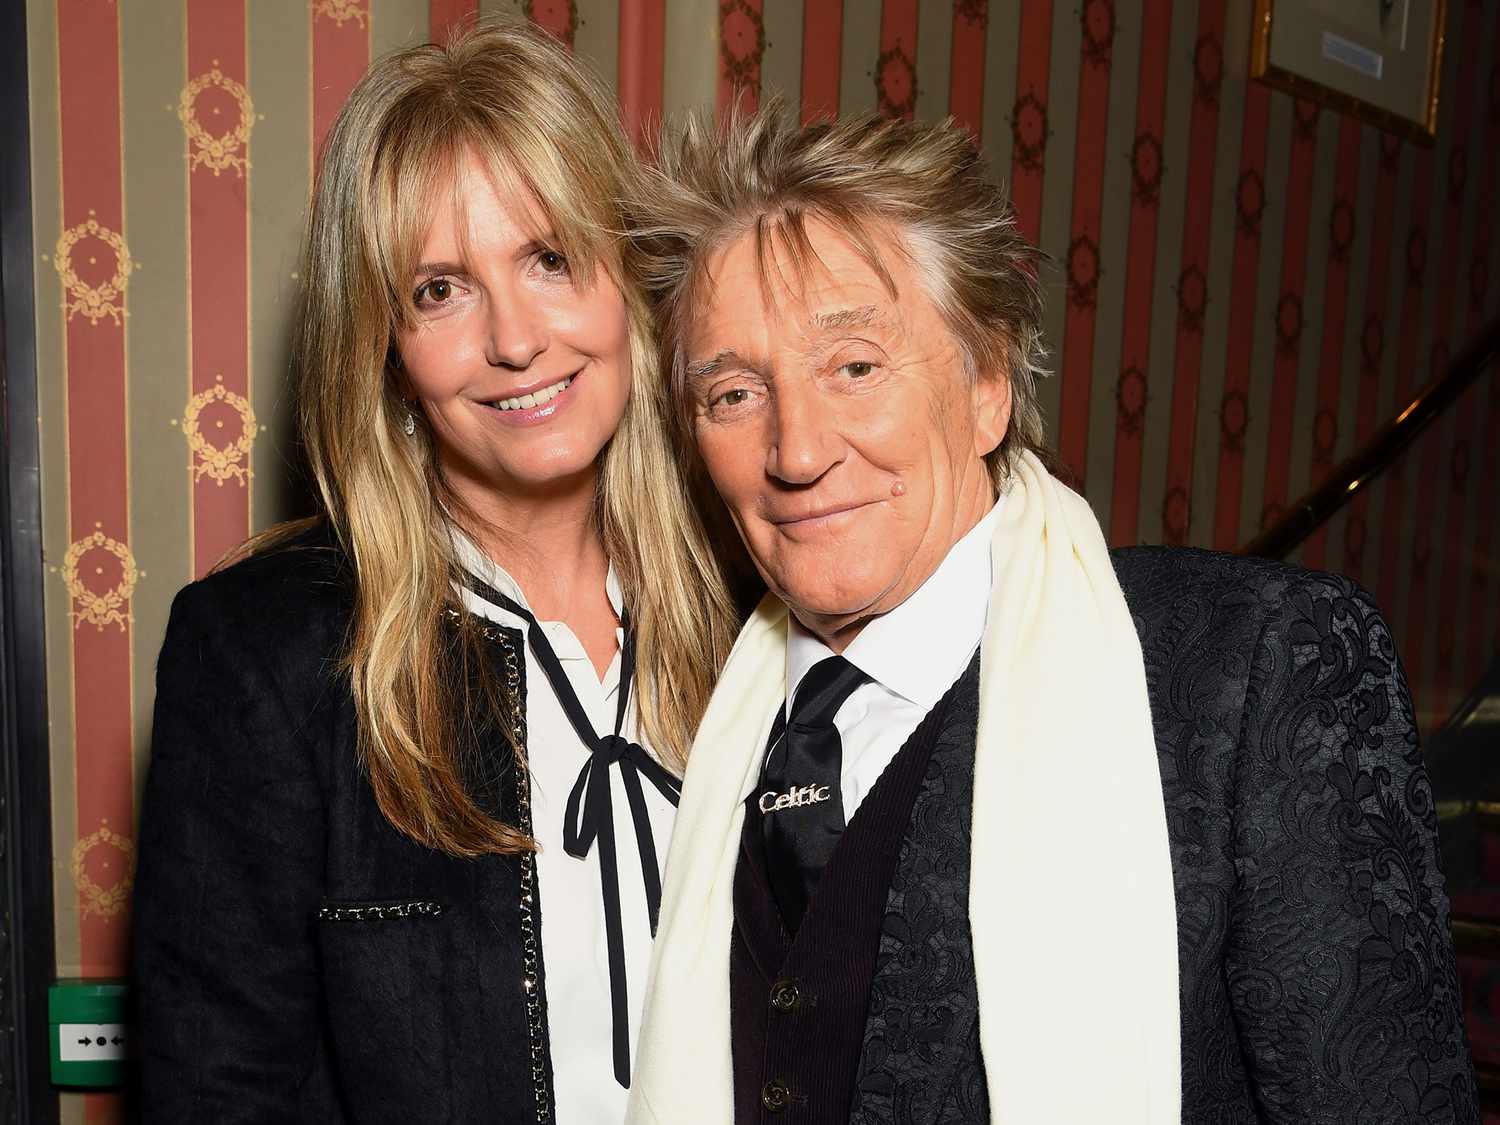 is penny lancaster pregnant